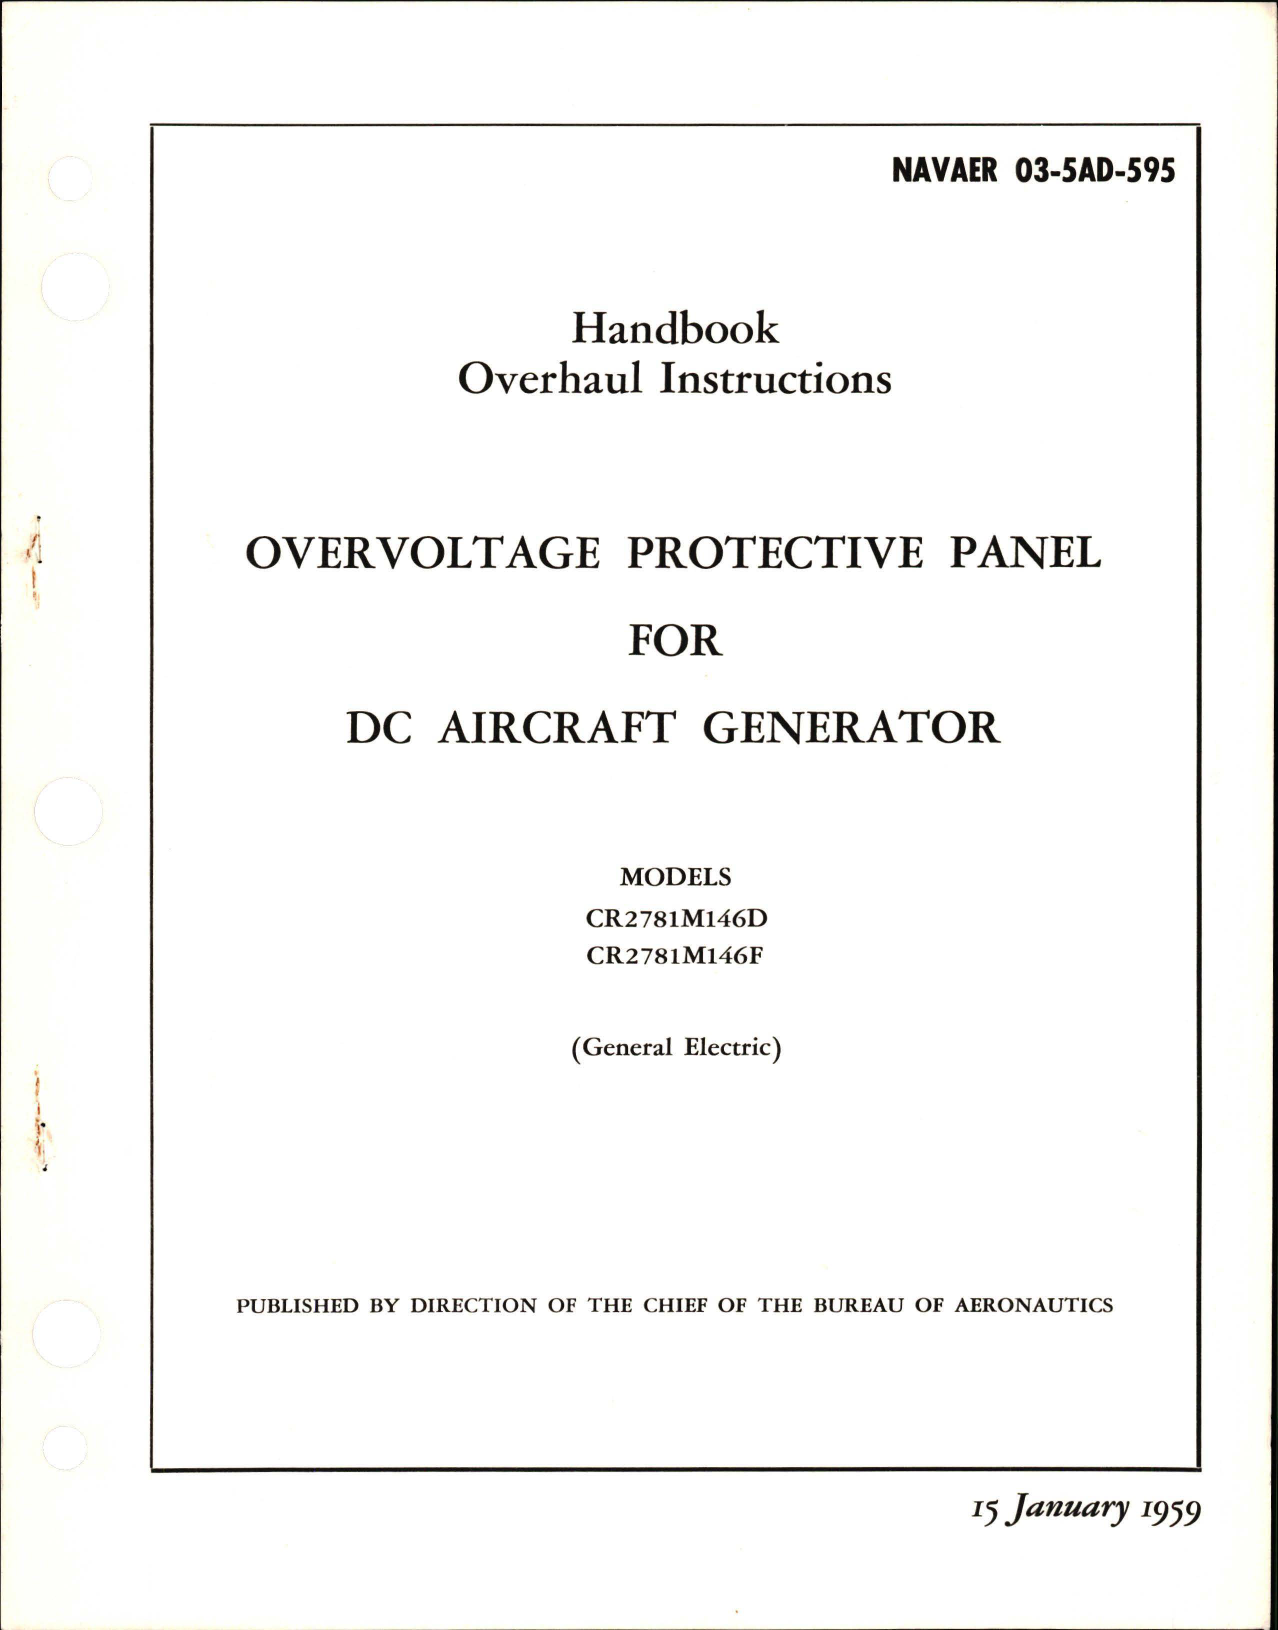 Sample page 1 from AirCorps Library document: Overhaul Instructions for Overvoltage Protective Panel for DC Generator - Models CR2781M146D and CR2781M146F 